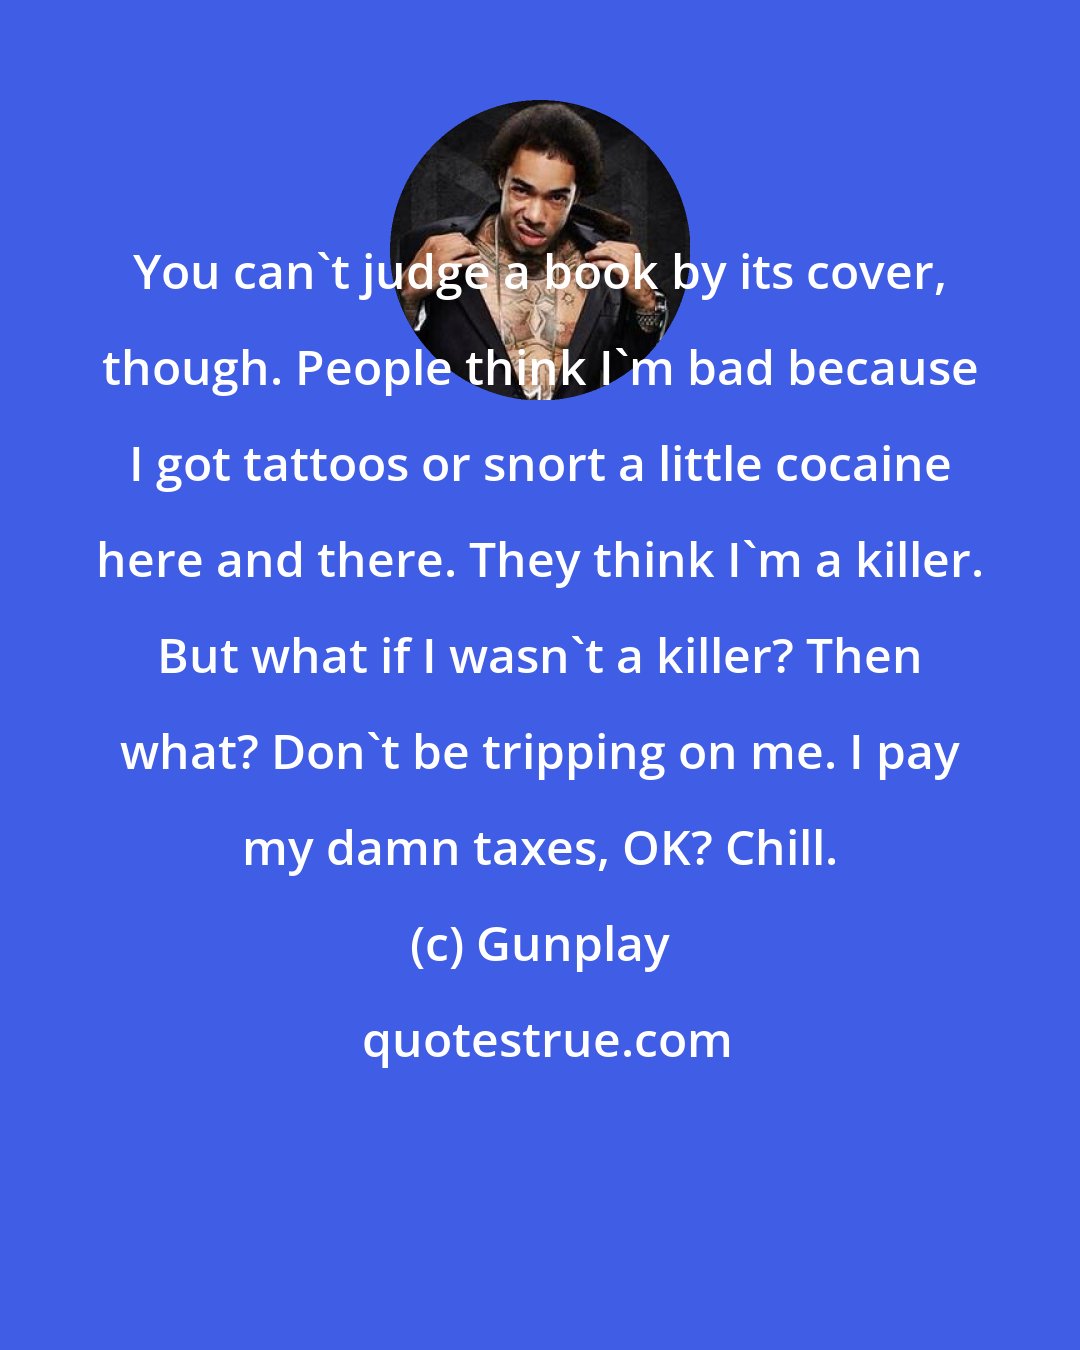 Gunplay: You can't judge a book by its cover, though. People think I'm bad because I got tattoos or snort a little cocaine here and there. They think I'm a killer. But what if I wasn't a killer? Then what? Don't be tripping on me. I pay my damn taxes, OK? Chill.